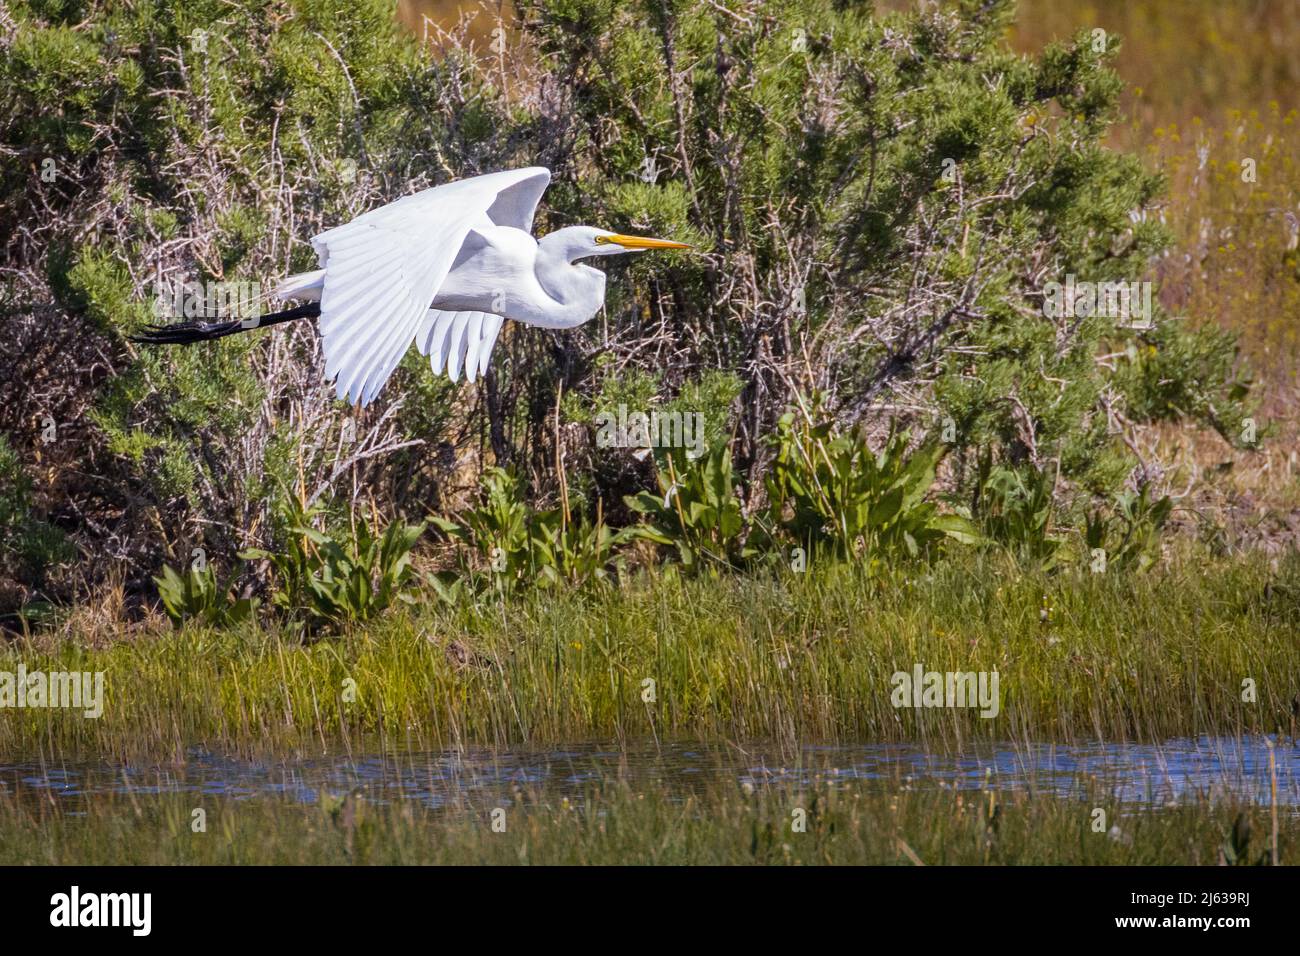 I spotted this great egret in a little marshy area at the edge of the Honey Lake Wildlife Area in Lassen County California, USA.  The majestic bird wa Stock Photo